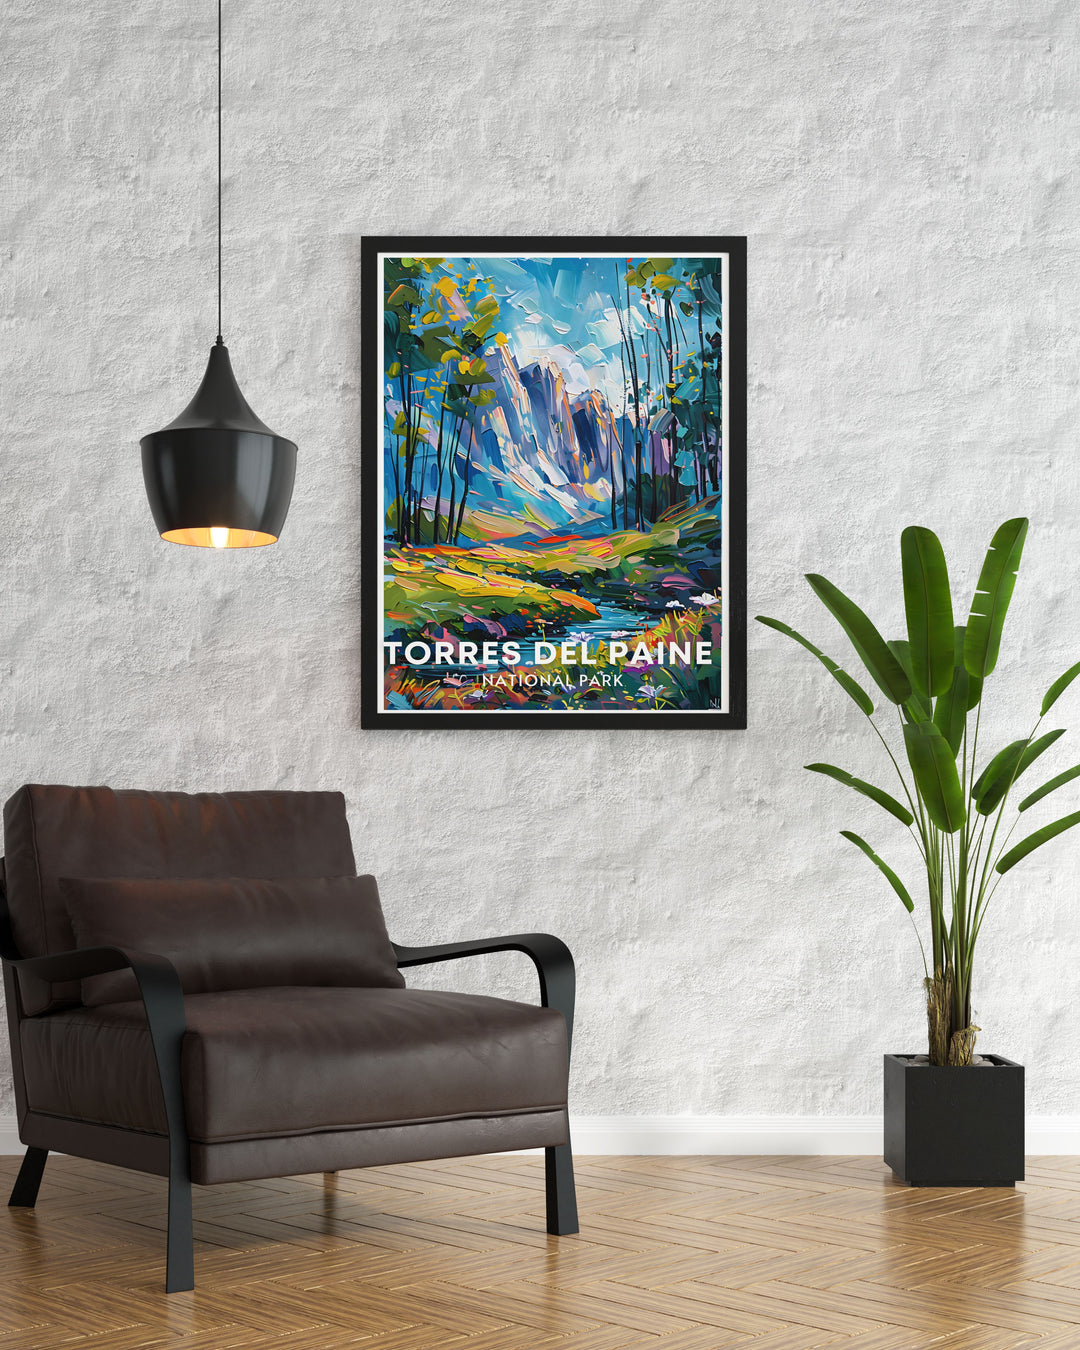 Glaciar Gray framed print showcasing the dramatic landscapes of Torres Del Paine National Park in Patagonia Chile. This Chile wall art is ideal for adding a touch of elegance and natural beauty to any room.